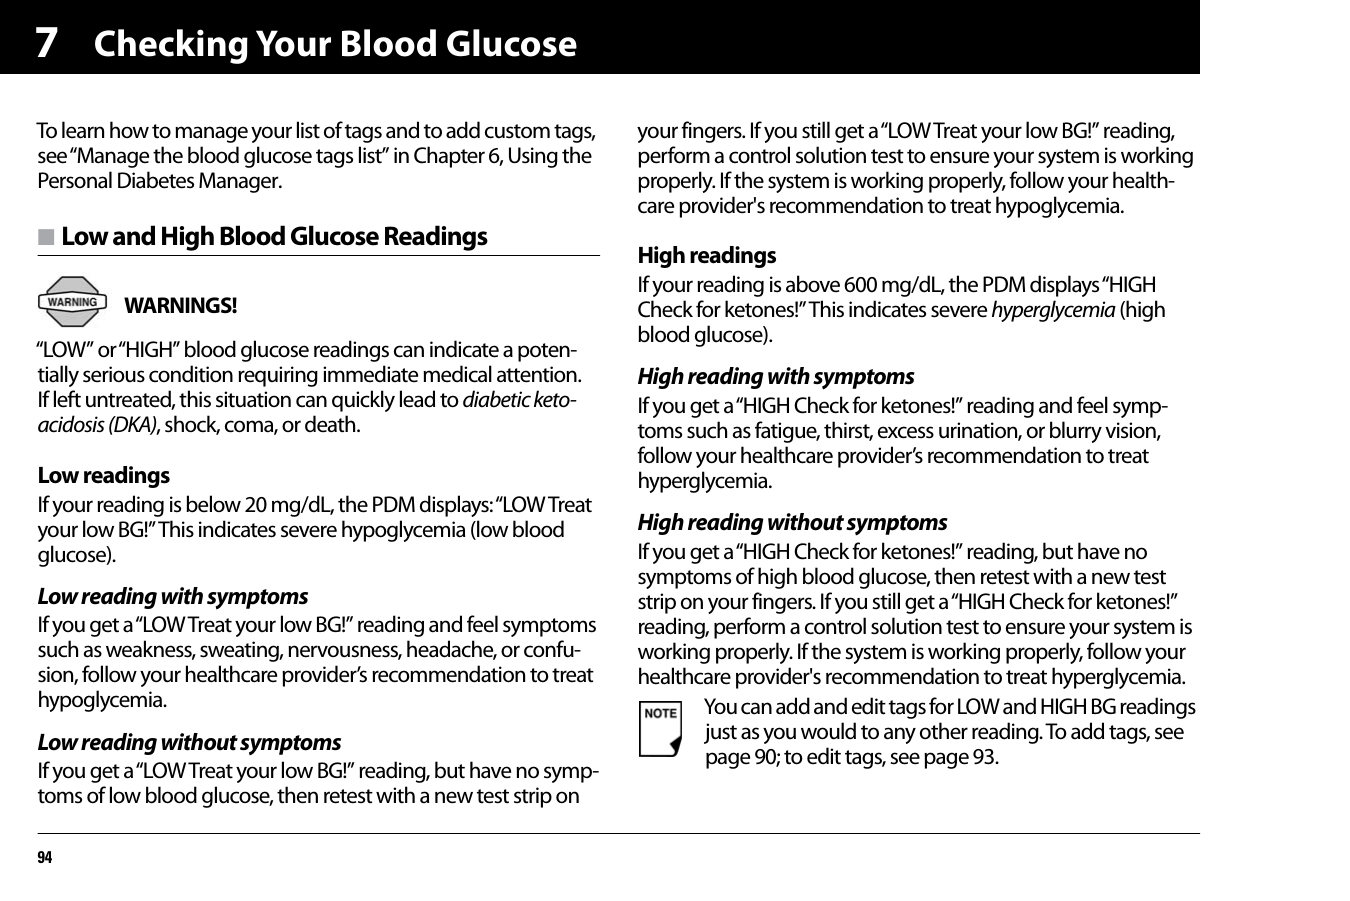 Checking Your Blood Glucose947To learn how to manage your list of tags and to add custom tags, see “Manage the blood glucose tags list” in Chapter 6, Using the Personal Diabetes Manager.n Low and High Blood Glucose ReadingsWARNINGS! “LOW” or “HIGH” blood glucose readings can indicate a poten-tially serious condition requiring immediate medical attention. If left untreated, this situation can quickly lead to diabetic keto-acidosis (DKA), shock, coma, or death.Low readingsIf your reading is below 20 mg/dL, the PDM displays: “LOW Treat your low BG!” This indicates severe hypoglycemia (low blood glucose).Low reading with symptomsIf you get a “LOW Treat your low BG!” reading and feel symptoms such as weakness, sweating, nervousness, headache, or confu-sion, follow your healthcare provider’s recommendation to treat hypoglycemia.Low reading without symptomsIf you get a “LOW Treat your low BG!” reading, but have no symp-toms of low blood glucose, then retest with a new test strip on your fingers. If you still get a “LOW Treat your low BG!” reading, perform a control solution test to ensure your system is working properly. If the system is working properly, follow your health-care provider&apos;s recommendation to treat hypoglycemia.High readingsIf your reading is above 600 mg/dL, the PDM displays “HIGH Check for ketones!” This indicates severe hyperglycemia (high blood glucose).High reading with symptomsIf you get a “HIGH Check for ketones!” reading and feel symp-toms such as fatigue, thirst, excess urination, or blurry vision, follow your healthcare provider’s recommendation to treat hyperglycemia.High reading without symptomsIf you get a “HIGH Check for ketones!” reading, but have no symptoms of high blood glucose, then retest with a new test strip on your fingers. If you still get a “HIGH Check for ketones!” reading, perform a control solution test to ensure your system is working properly. If the system is working properly, follow your healthcare provider&apos;s recommendation to treat hyperglycemia.You can add and edit tags for LOW and HIGH BG readings just as you would to any other reading. To add tags, see page 90; to edit tags, see page 93.